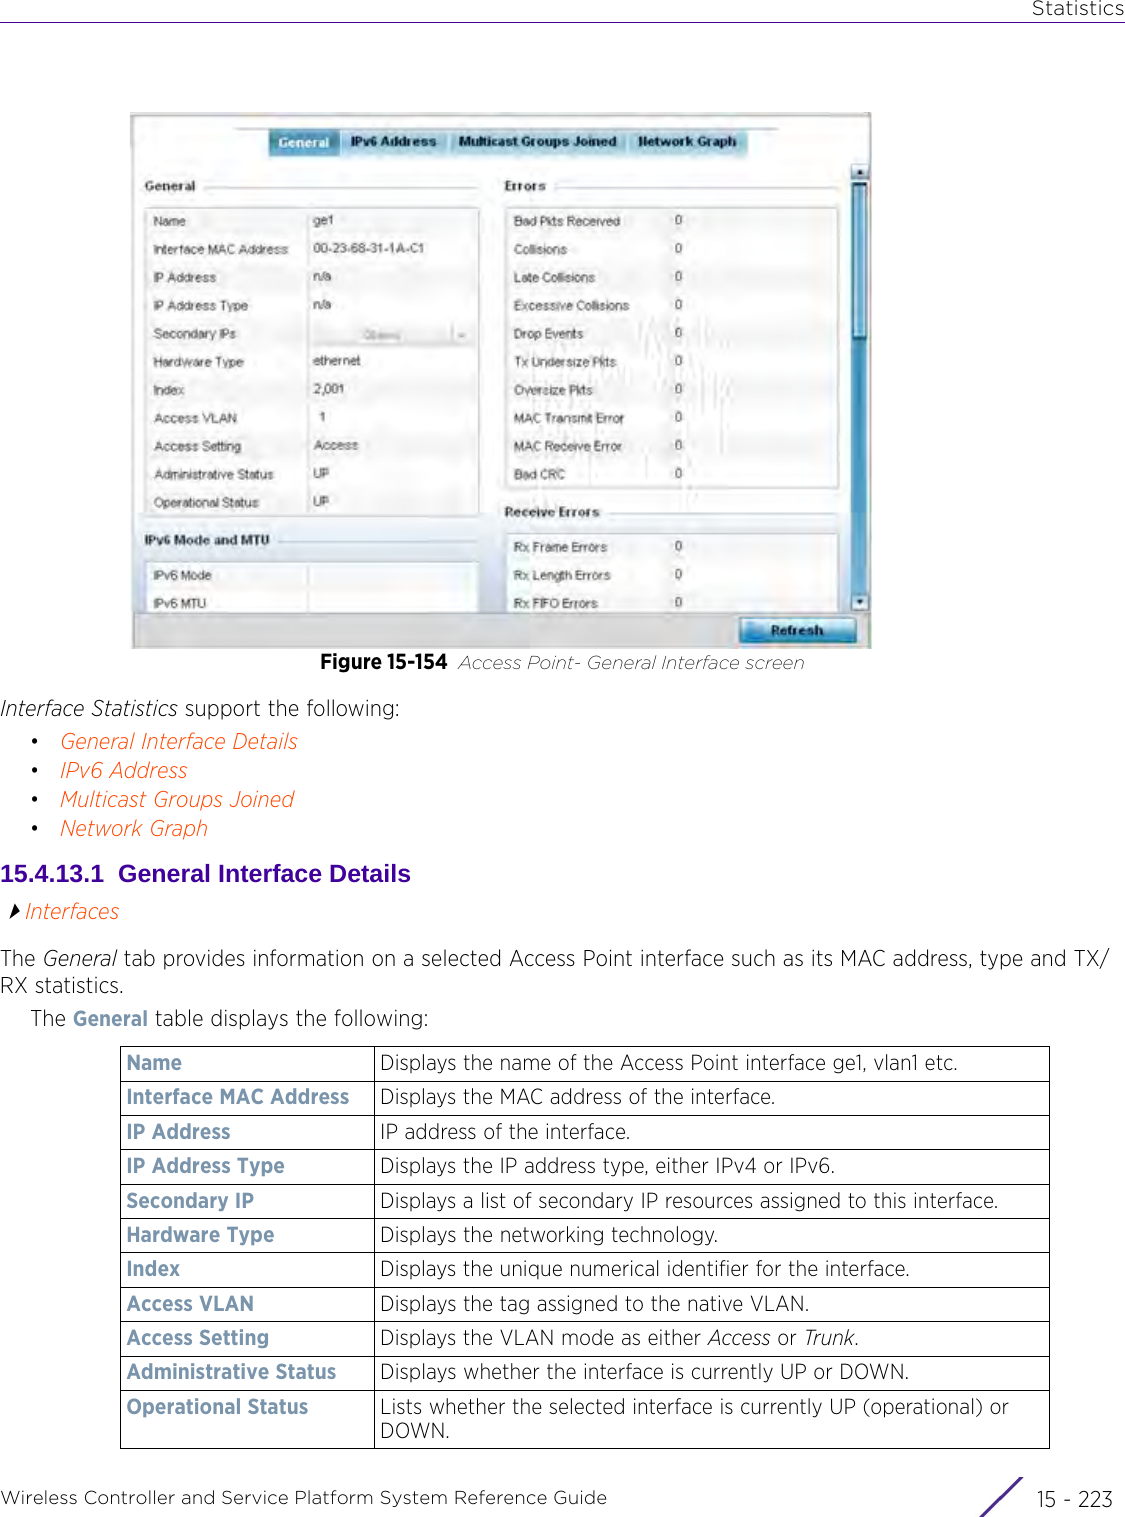 StatisticsWireless Controller and Service Platform System Reference Guide 15 - 223Figure 15-154 Access Point- General Interface screenInterface Statistics support the following:•General Interface Details•IPv6 Address•Multicast Groups Joined•Network Graph15.4.13.1  General Interface DetailsInterfacesThe General tab provides information on a selected Access Point interface such as its MAC address, type and TX/RX statistics.The General table displays the following:Name Displays the name of the Access Point interface ge1, vlan1 etc.Interface MAC Address Displays the MAC address of the interface.IP Address IP address of the interface. IP Address Type Displays the IP address type, either IPv4 or IPv6.Secondary IP Displays a list of secondary IP resources assigned to this interface.Hardware Type Displays the networking technology.Index Displays the unique numerical identifier for the interface.Access VLAN Displays the tag assigned to the native VLAN.Access Setting Displays the VLAN mode as either Access or Trunk.Administrative Status Displays whether the interface is currently UP or DOWN. Operational Status Lists whether the selected interface is currently UP (operational) or DOWN.